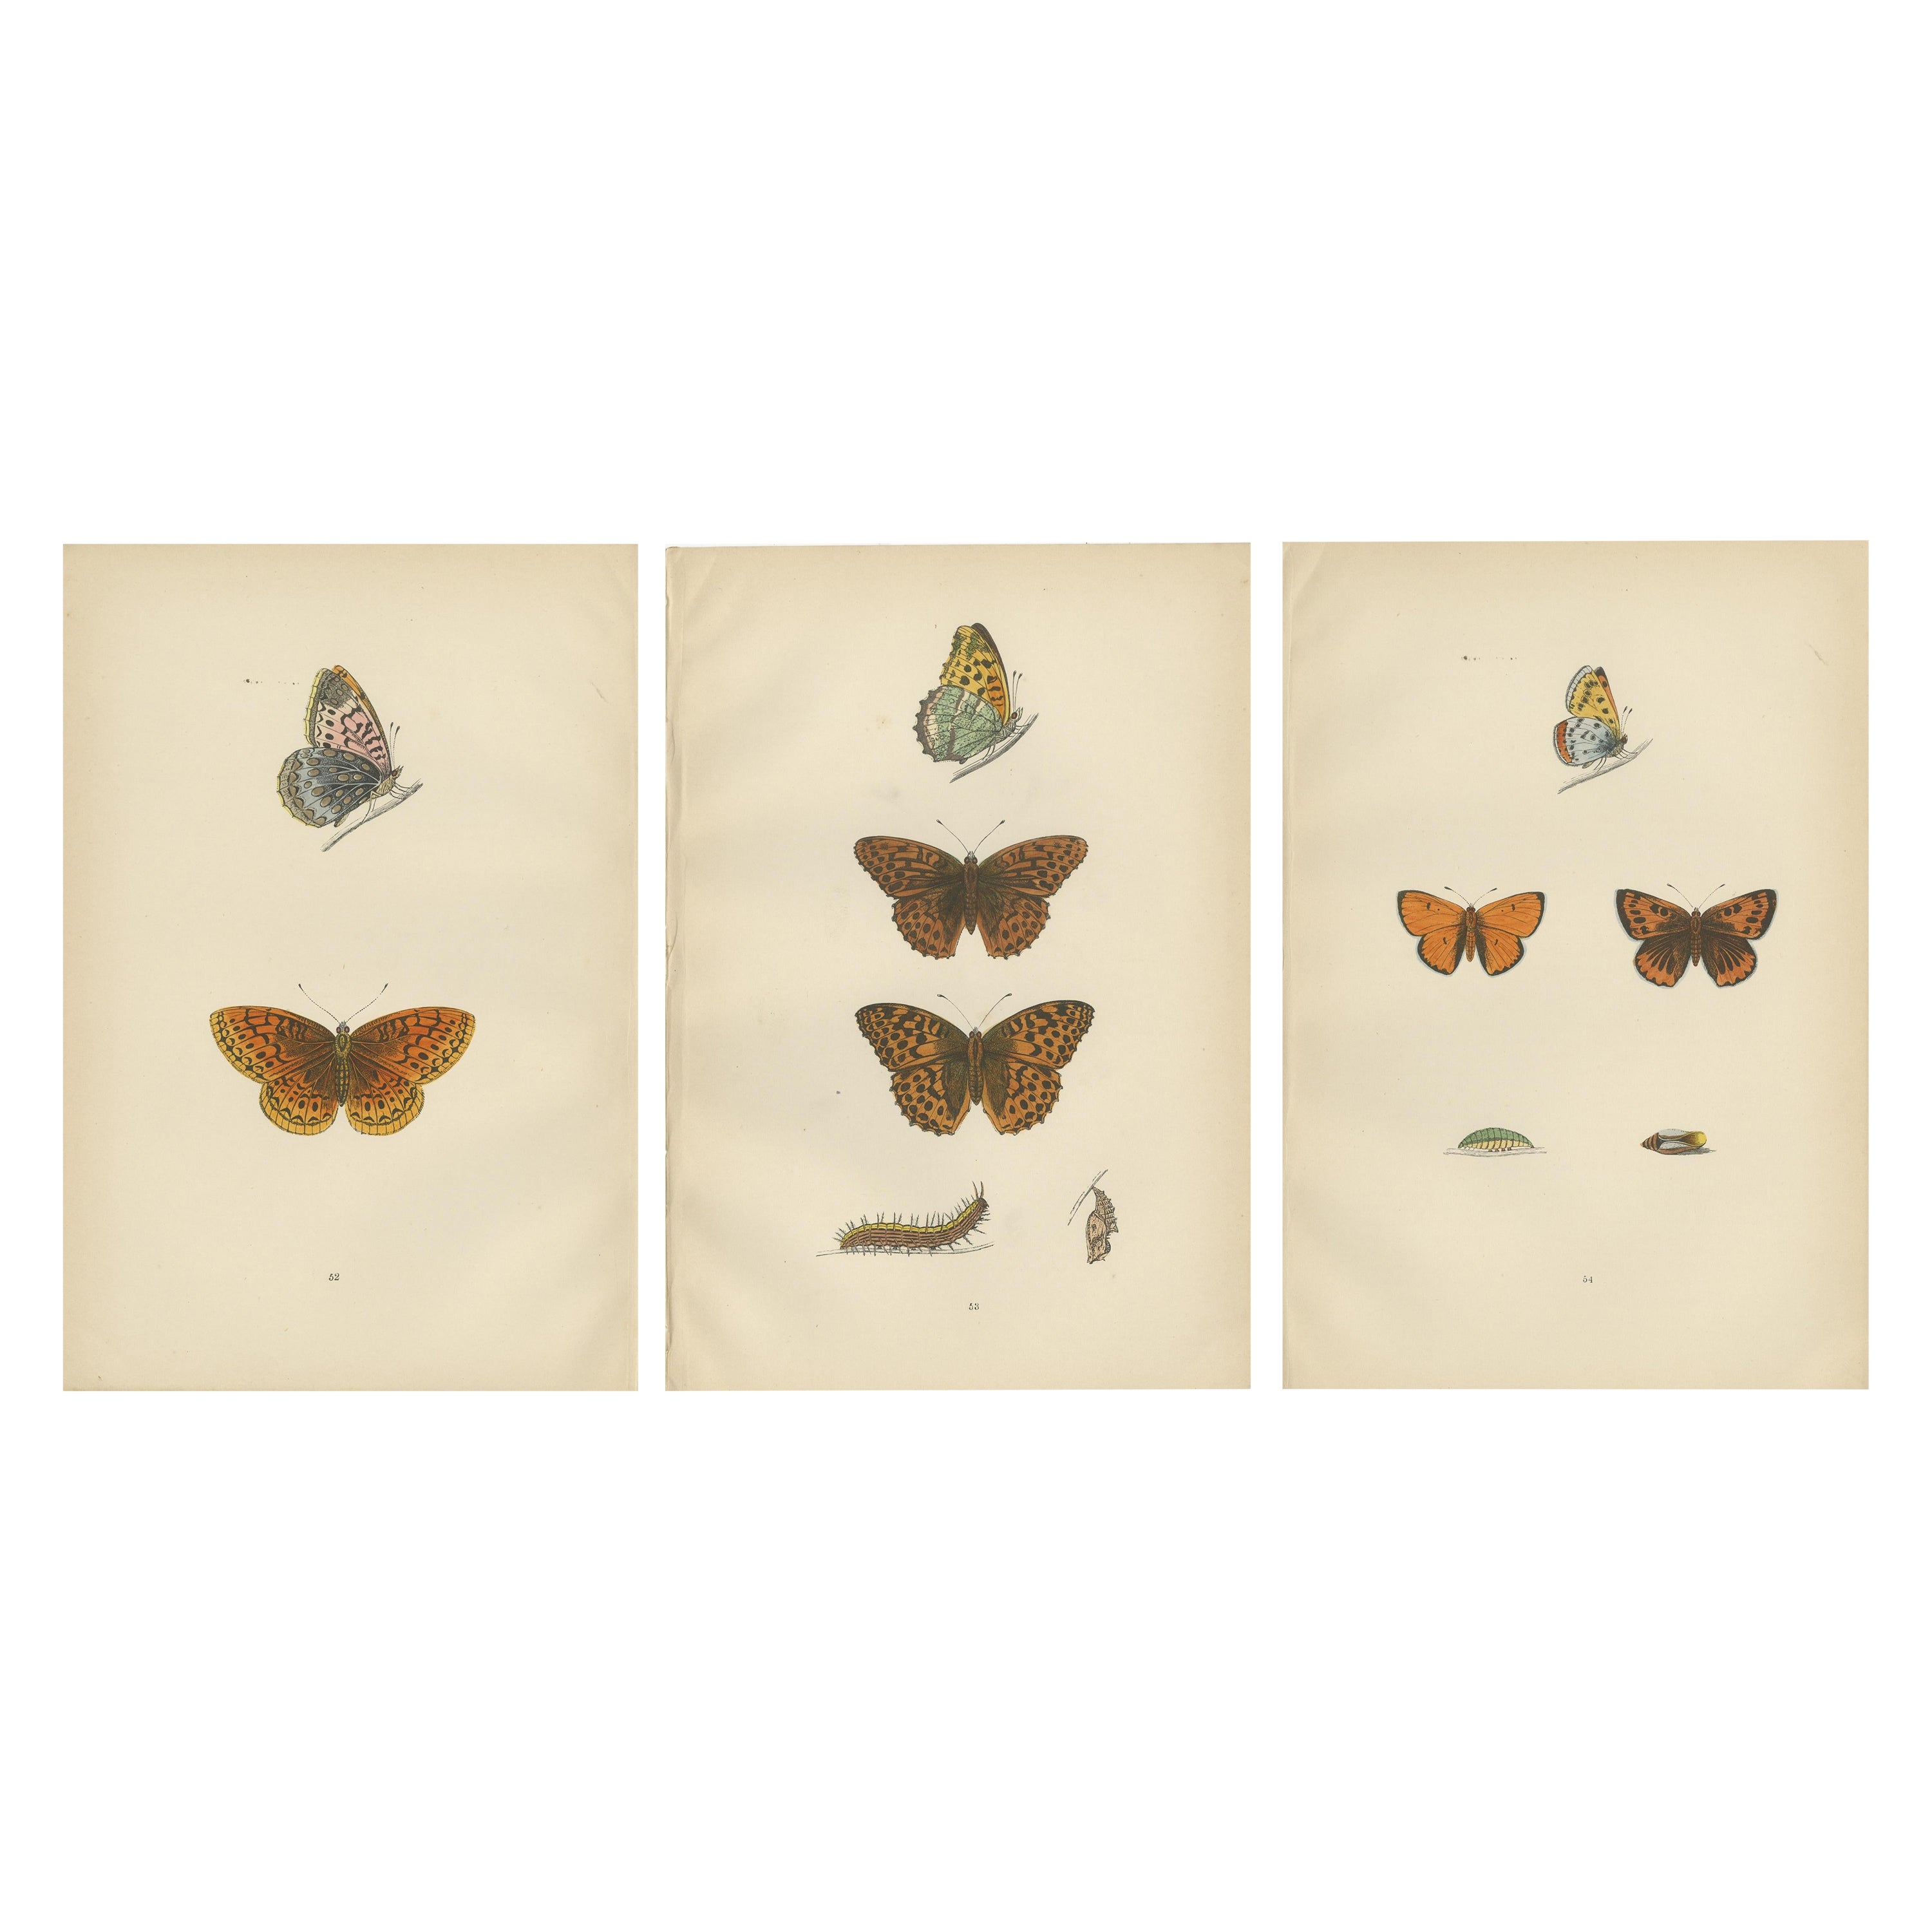 Vintage Wings: The Fritillary and Copper of Morris's 1890 Enchantment